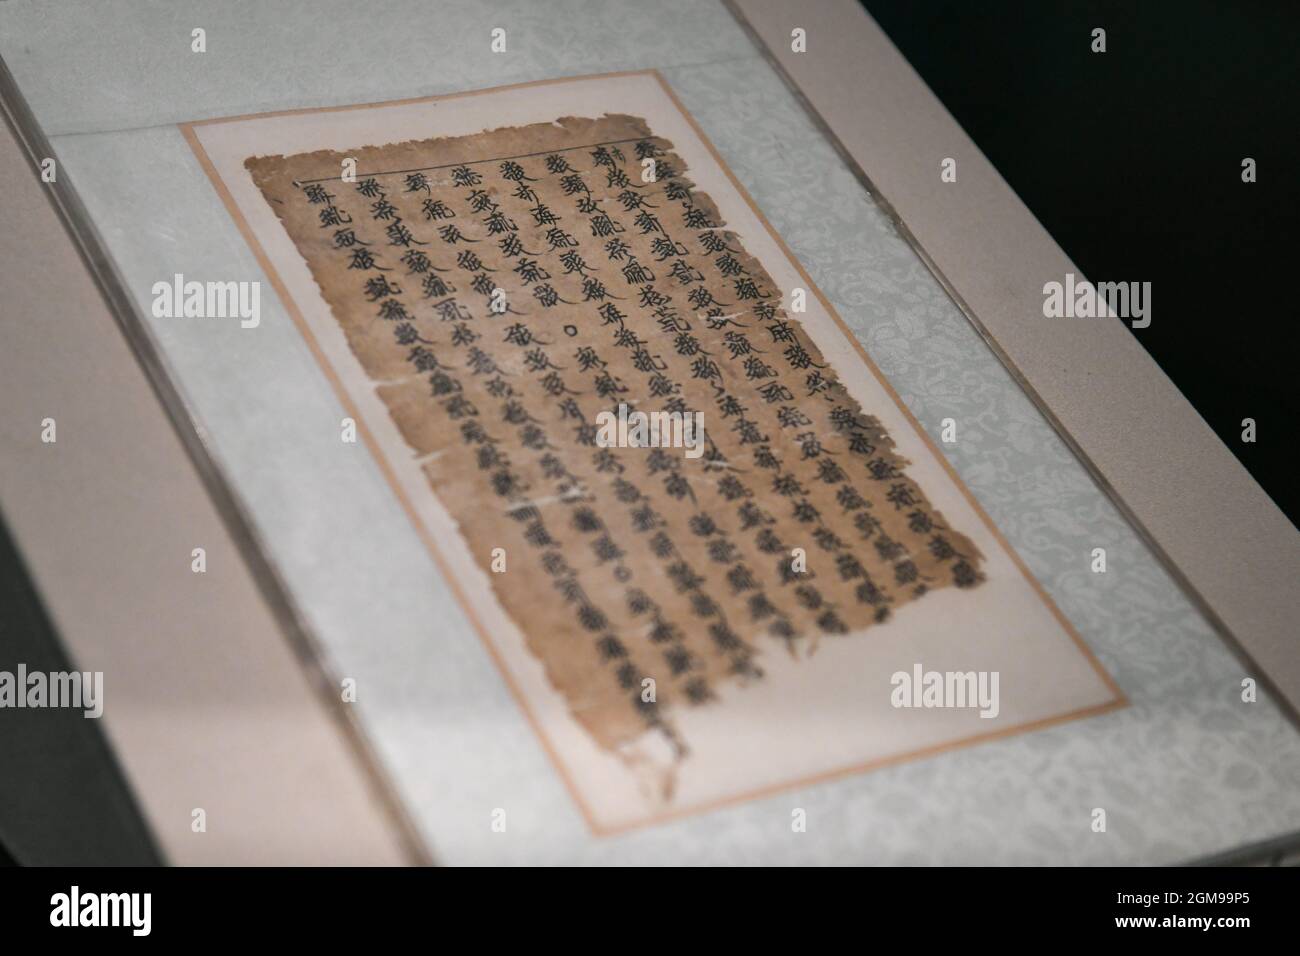 Chengdu. 17th Sep, 2021. Photo taken on Sept. 17, 2021 shows a herbal prescription written in language of Western Xia Dynasty (1038-1227) displayed during an exhibition featuring traditional Chinese medicine relics in Chengdu Museum in Chengdu, capital of southwest China's Sichuan Province. The exhibition, which kicked off here on Friday, showcases more than 300 traditional Chinese medicine-related relics. Credit: Xu Bingjie/Xinhua/Alamy Live News Stock Photo